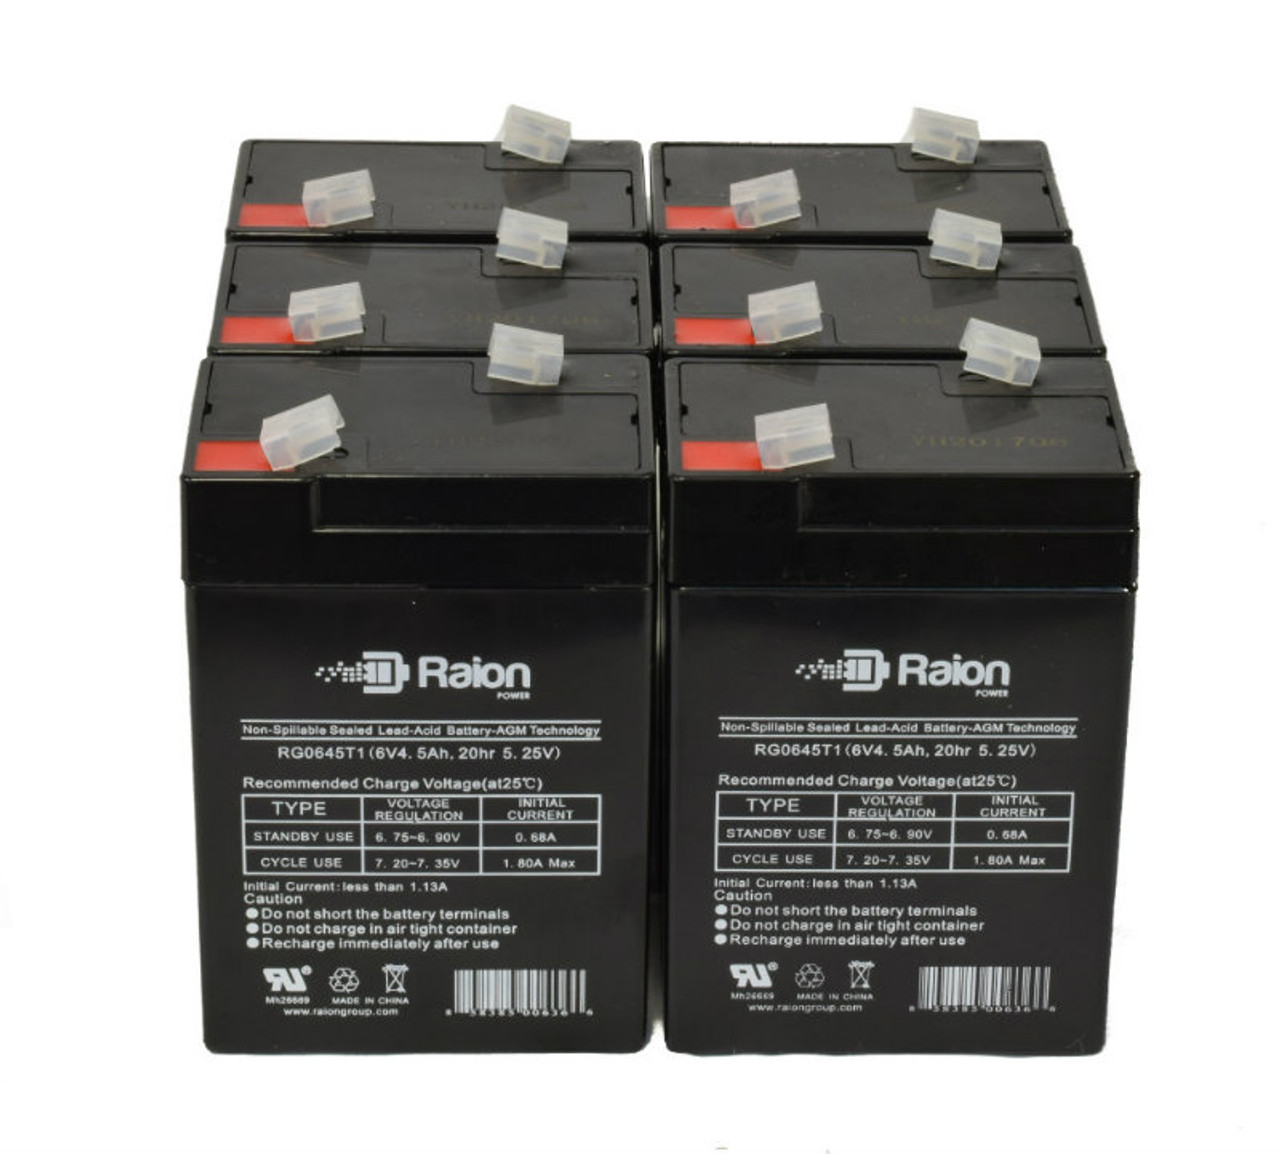 Raion Power RG0645T1 6V 4.5Ah Replacement Medical Equipment Battery for Philips HC102ES Old Style - 6 Pack